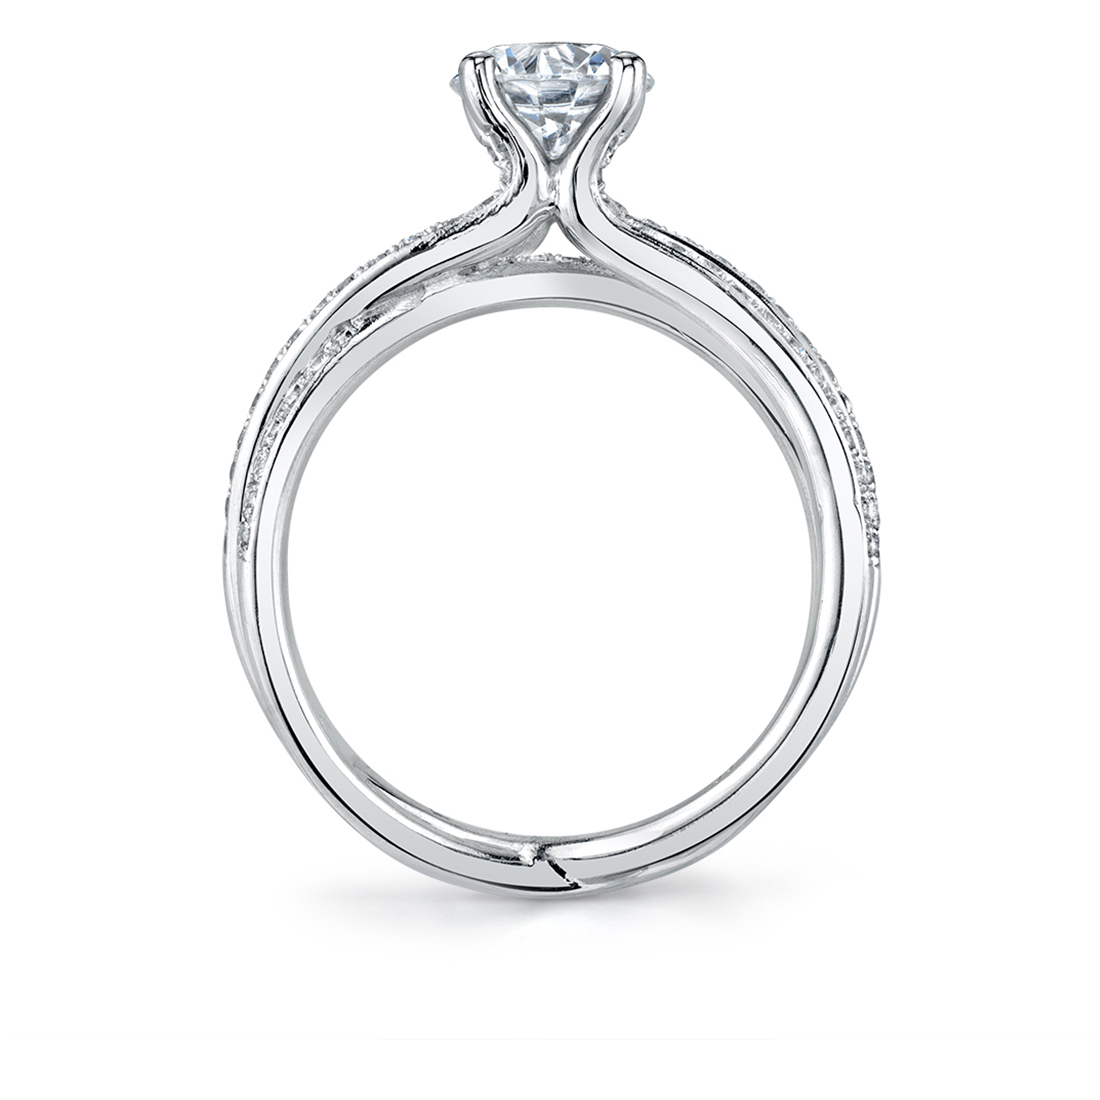 Profile Image of a Split Band Engagement Ring - Aleese